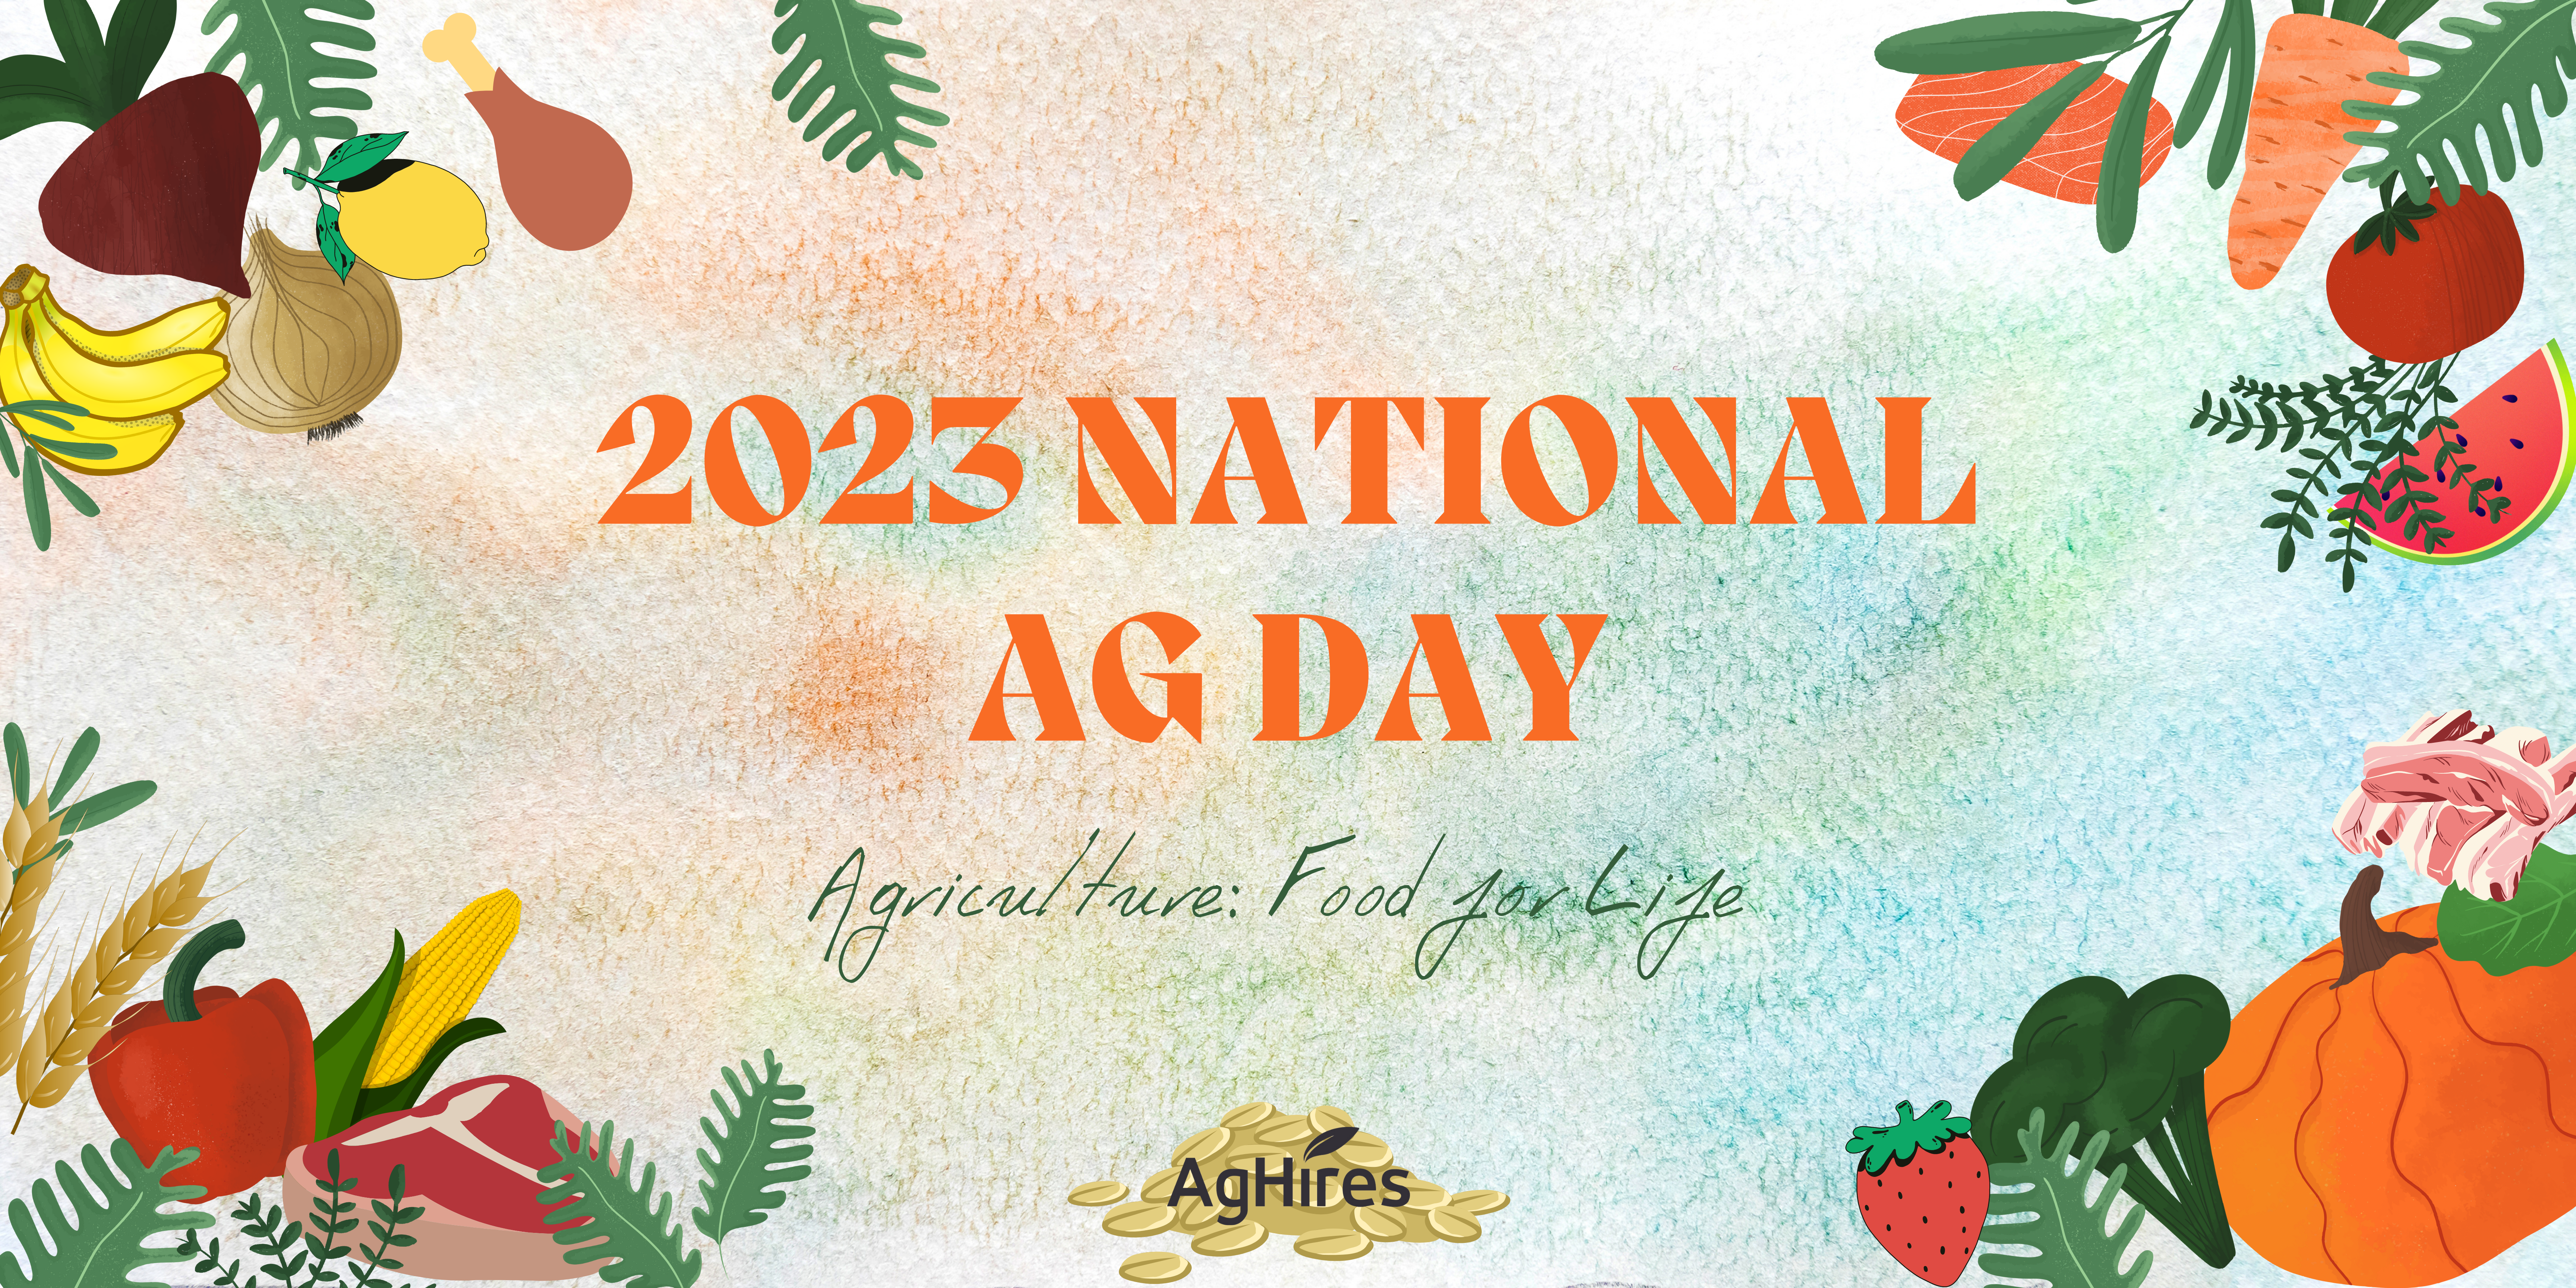 2023 National Agriculture Day 